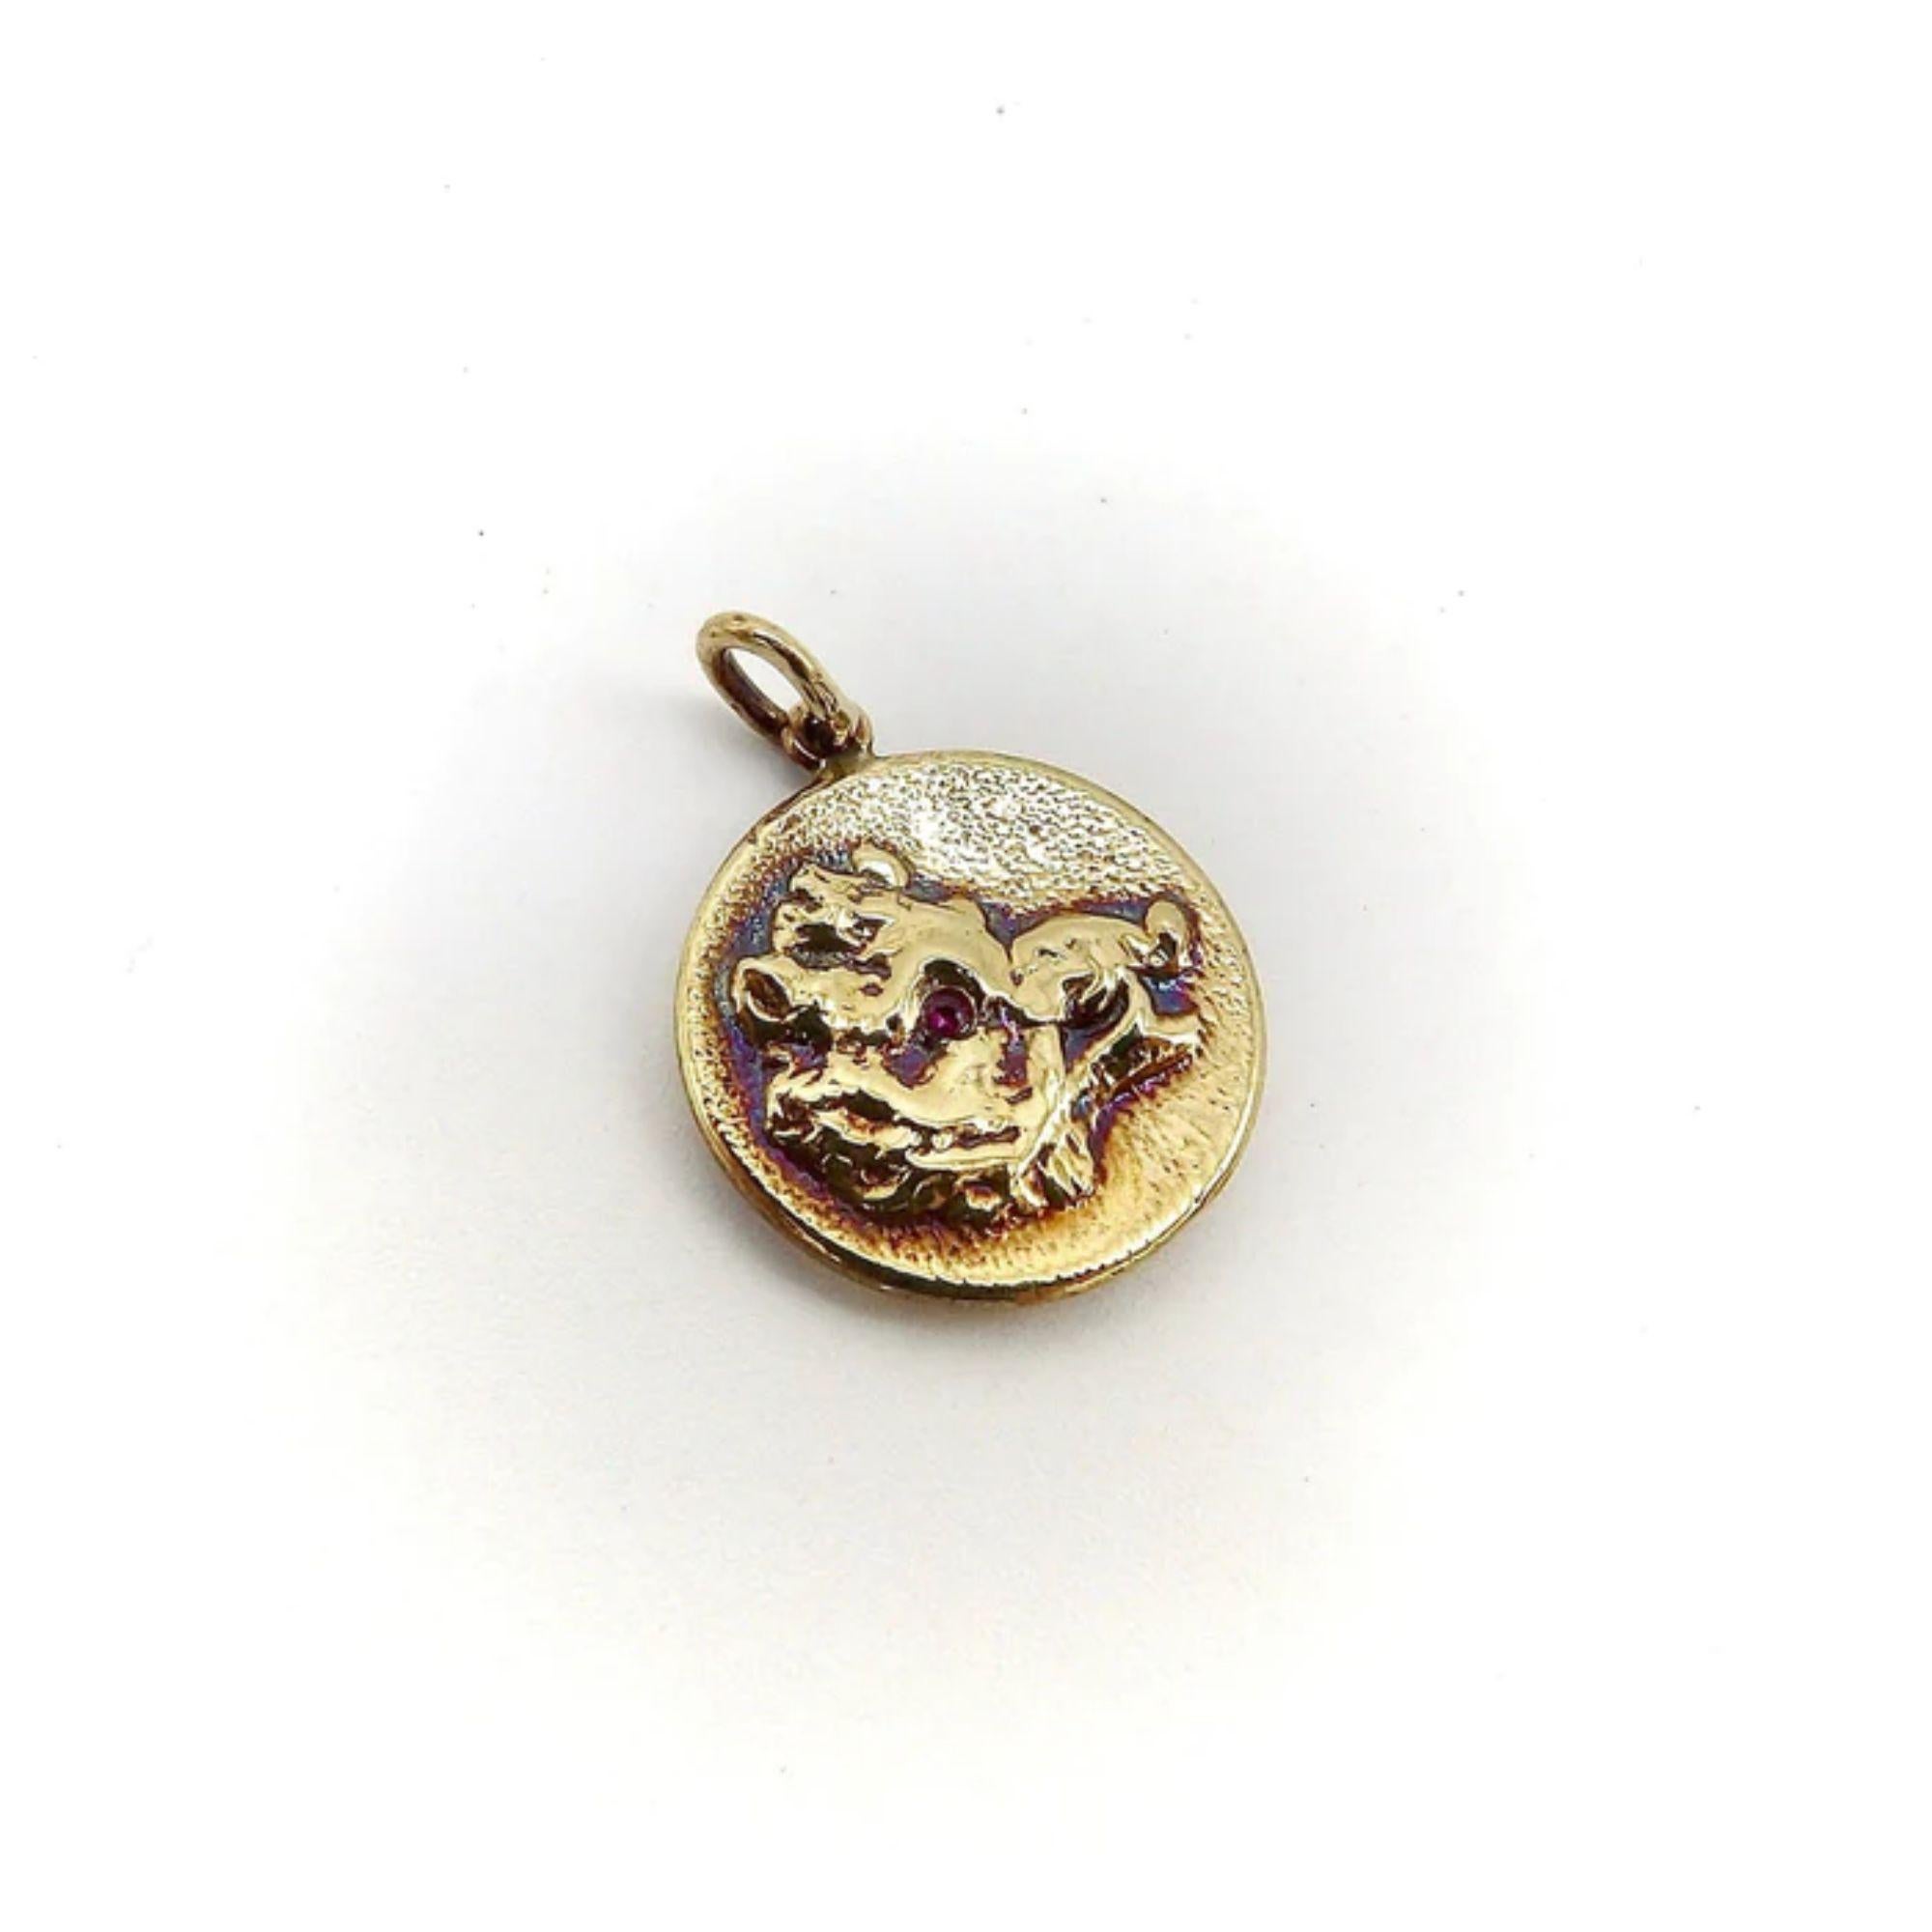 This is a precious 14k gold medallion charm from Kirsten’s Corner signature “Cute as a Button” collection. It is handcrafted from a Victorian era button and features a portrait of a boar. The face of the boar has striking ruby eyes that offer a nice